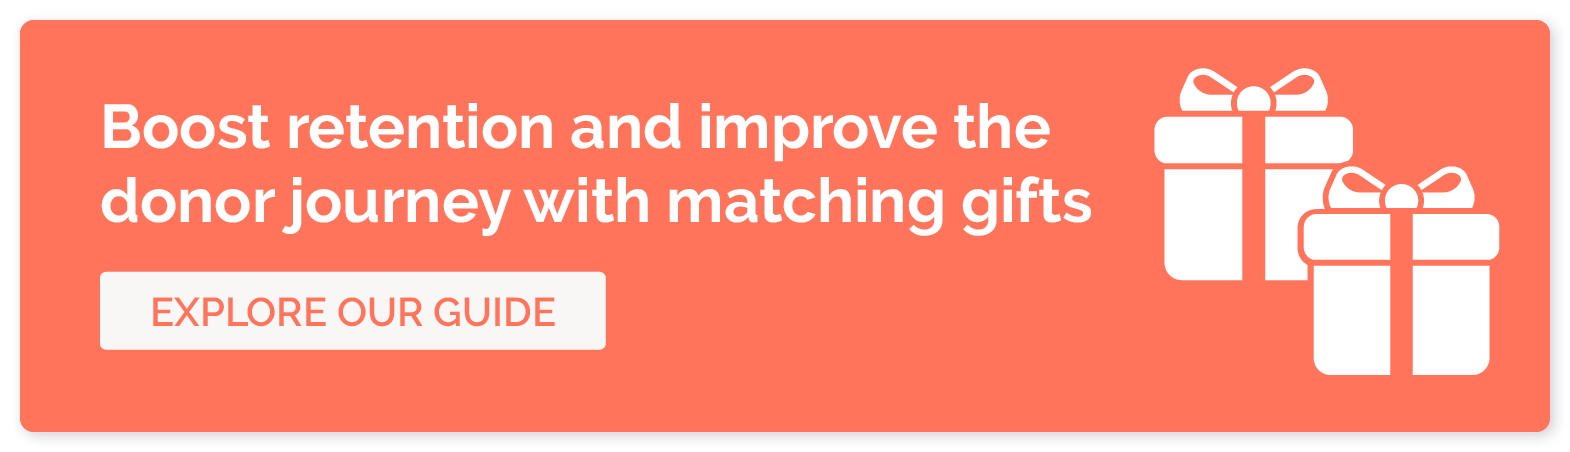 Boost retention and improve the donor journey with matching gifts. Explore our guide